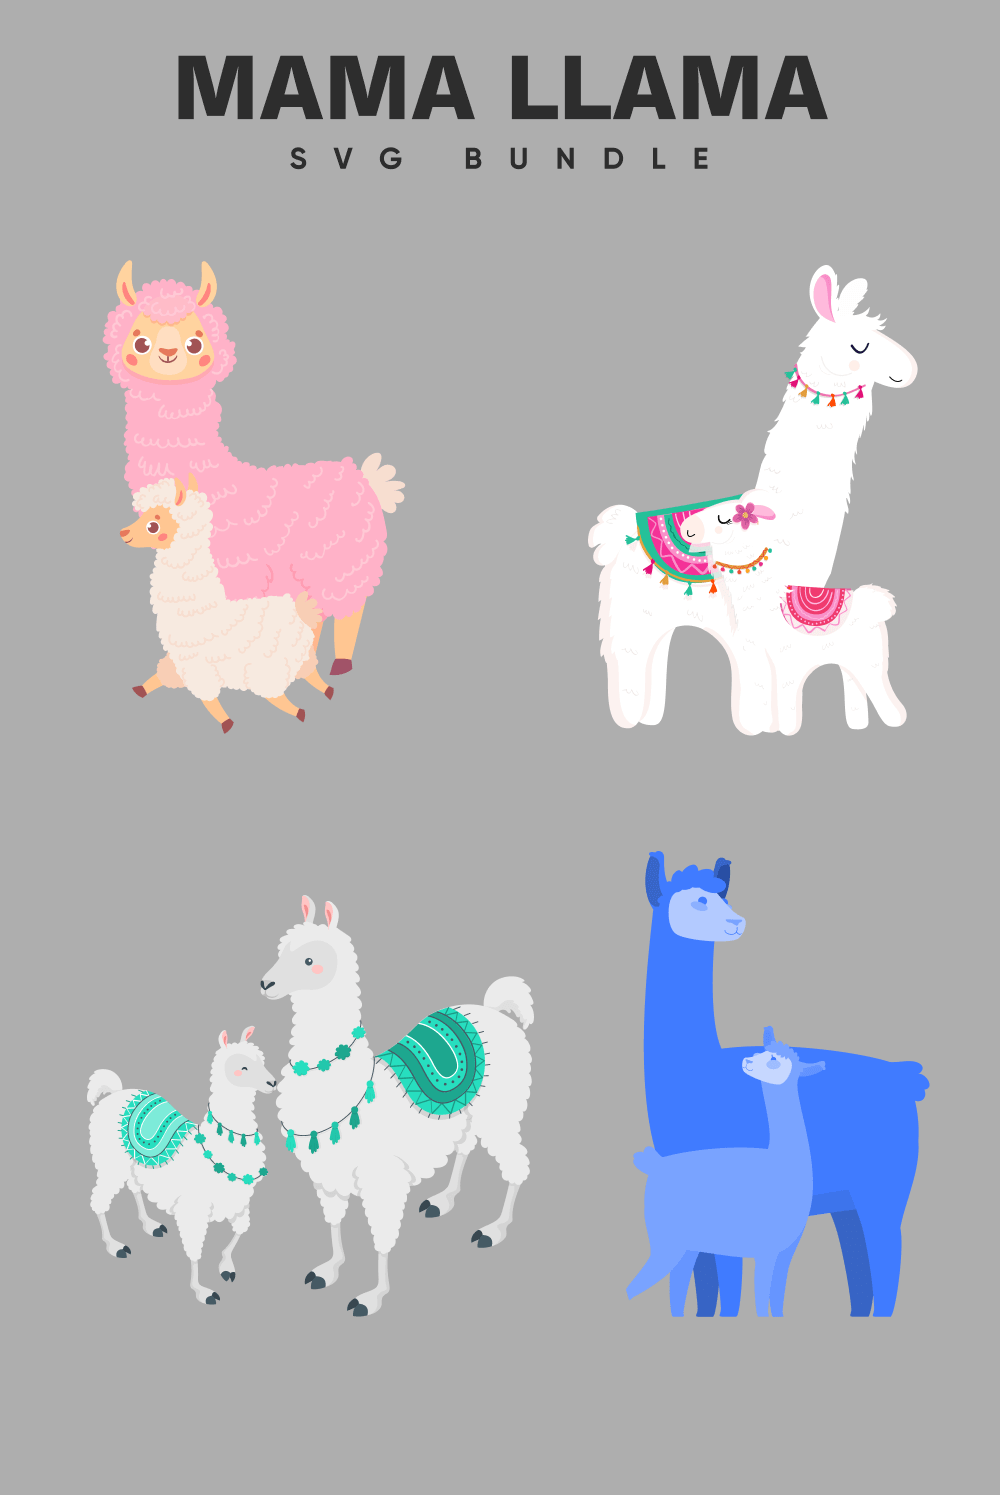 Group of llamas in different colors on a gray background.